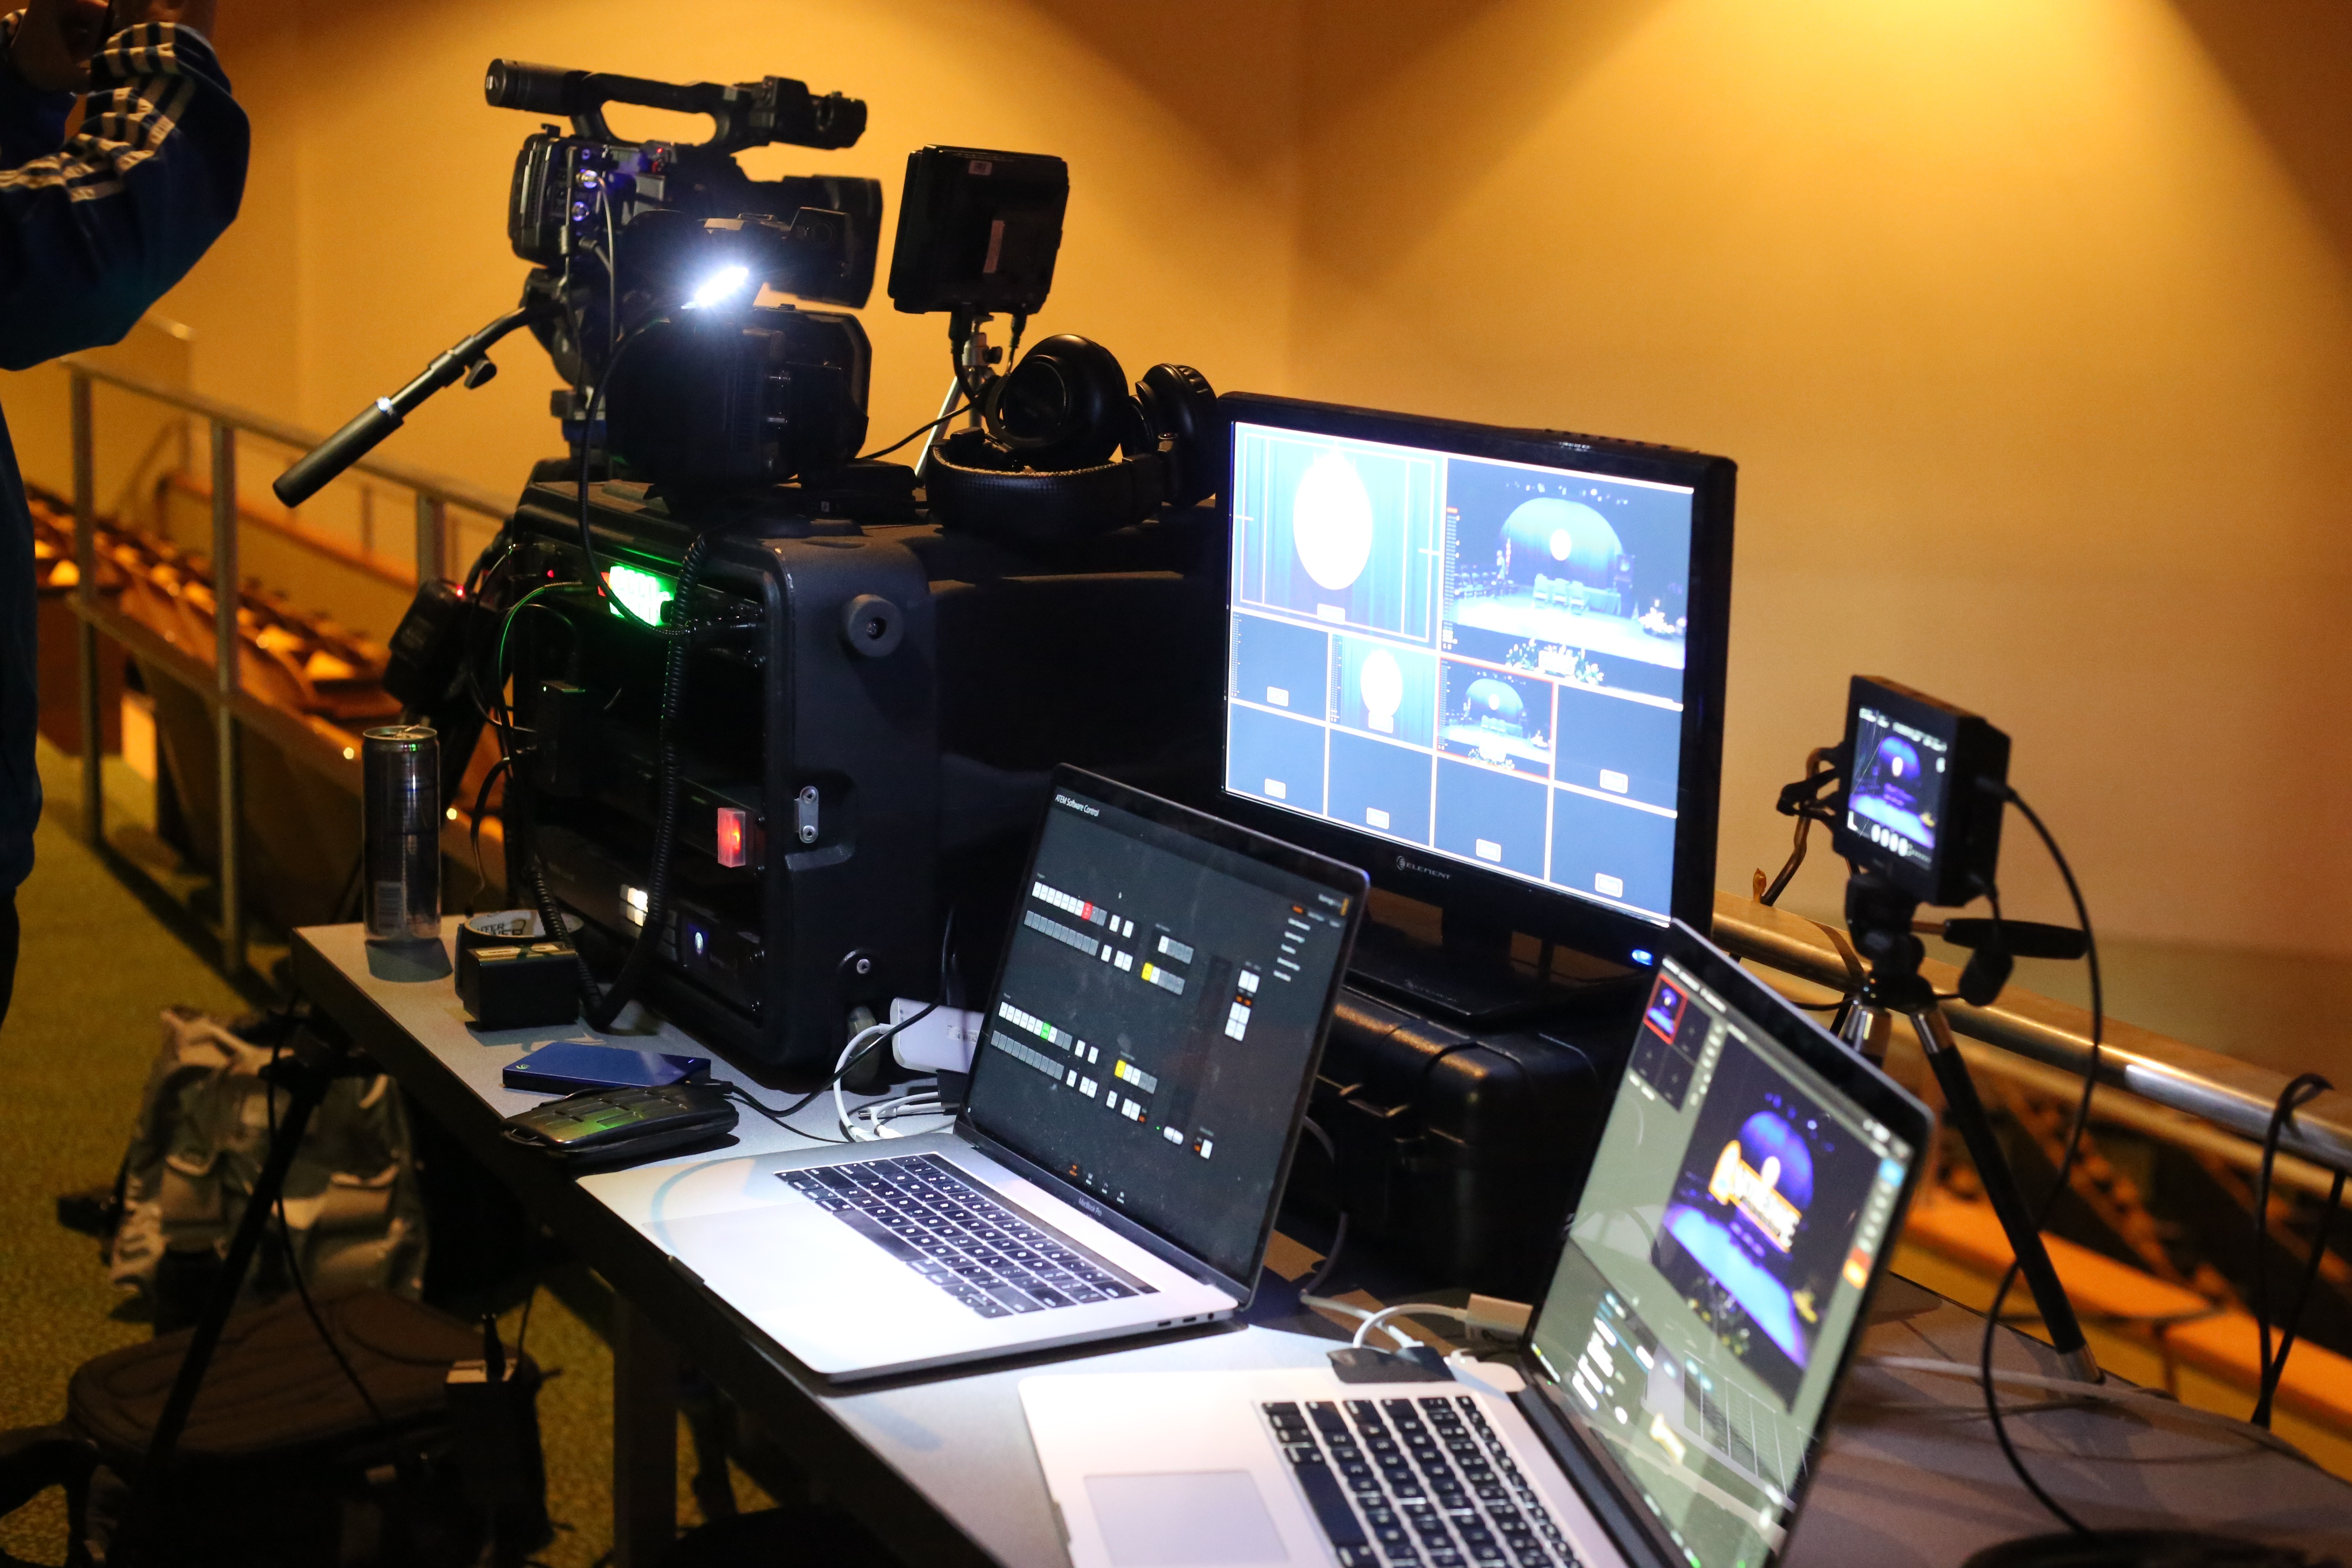 Live streaming setup with monitors, cameras, encoders, and computers